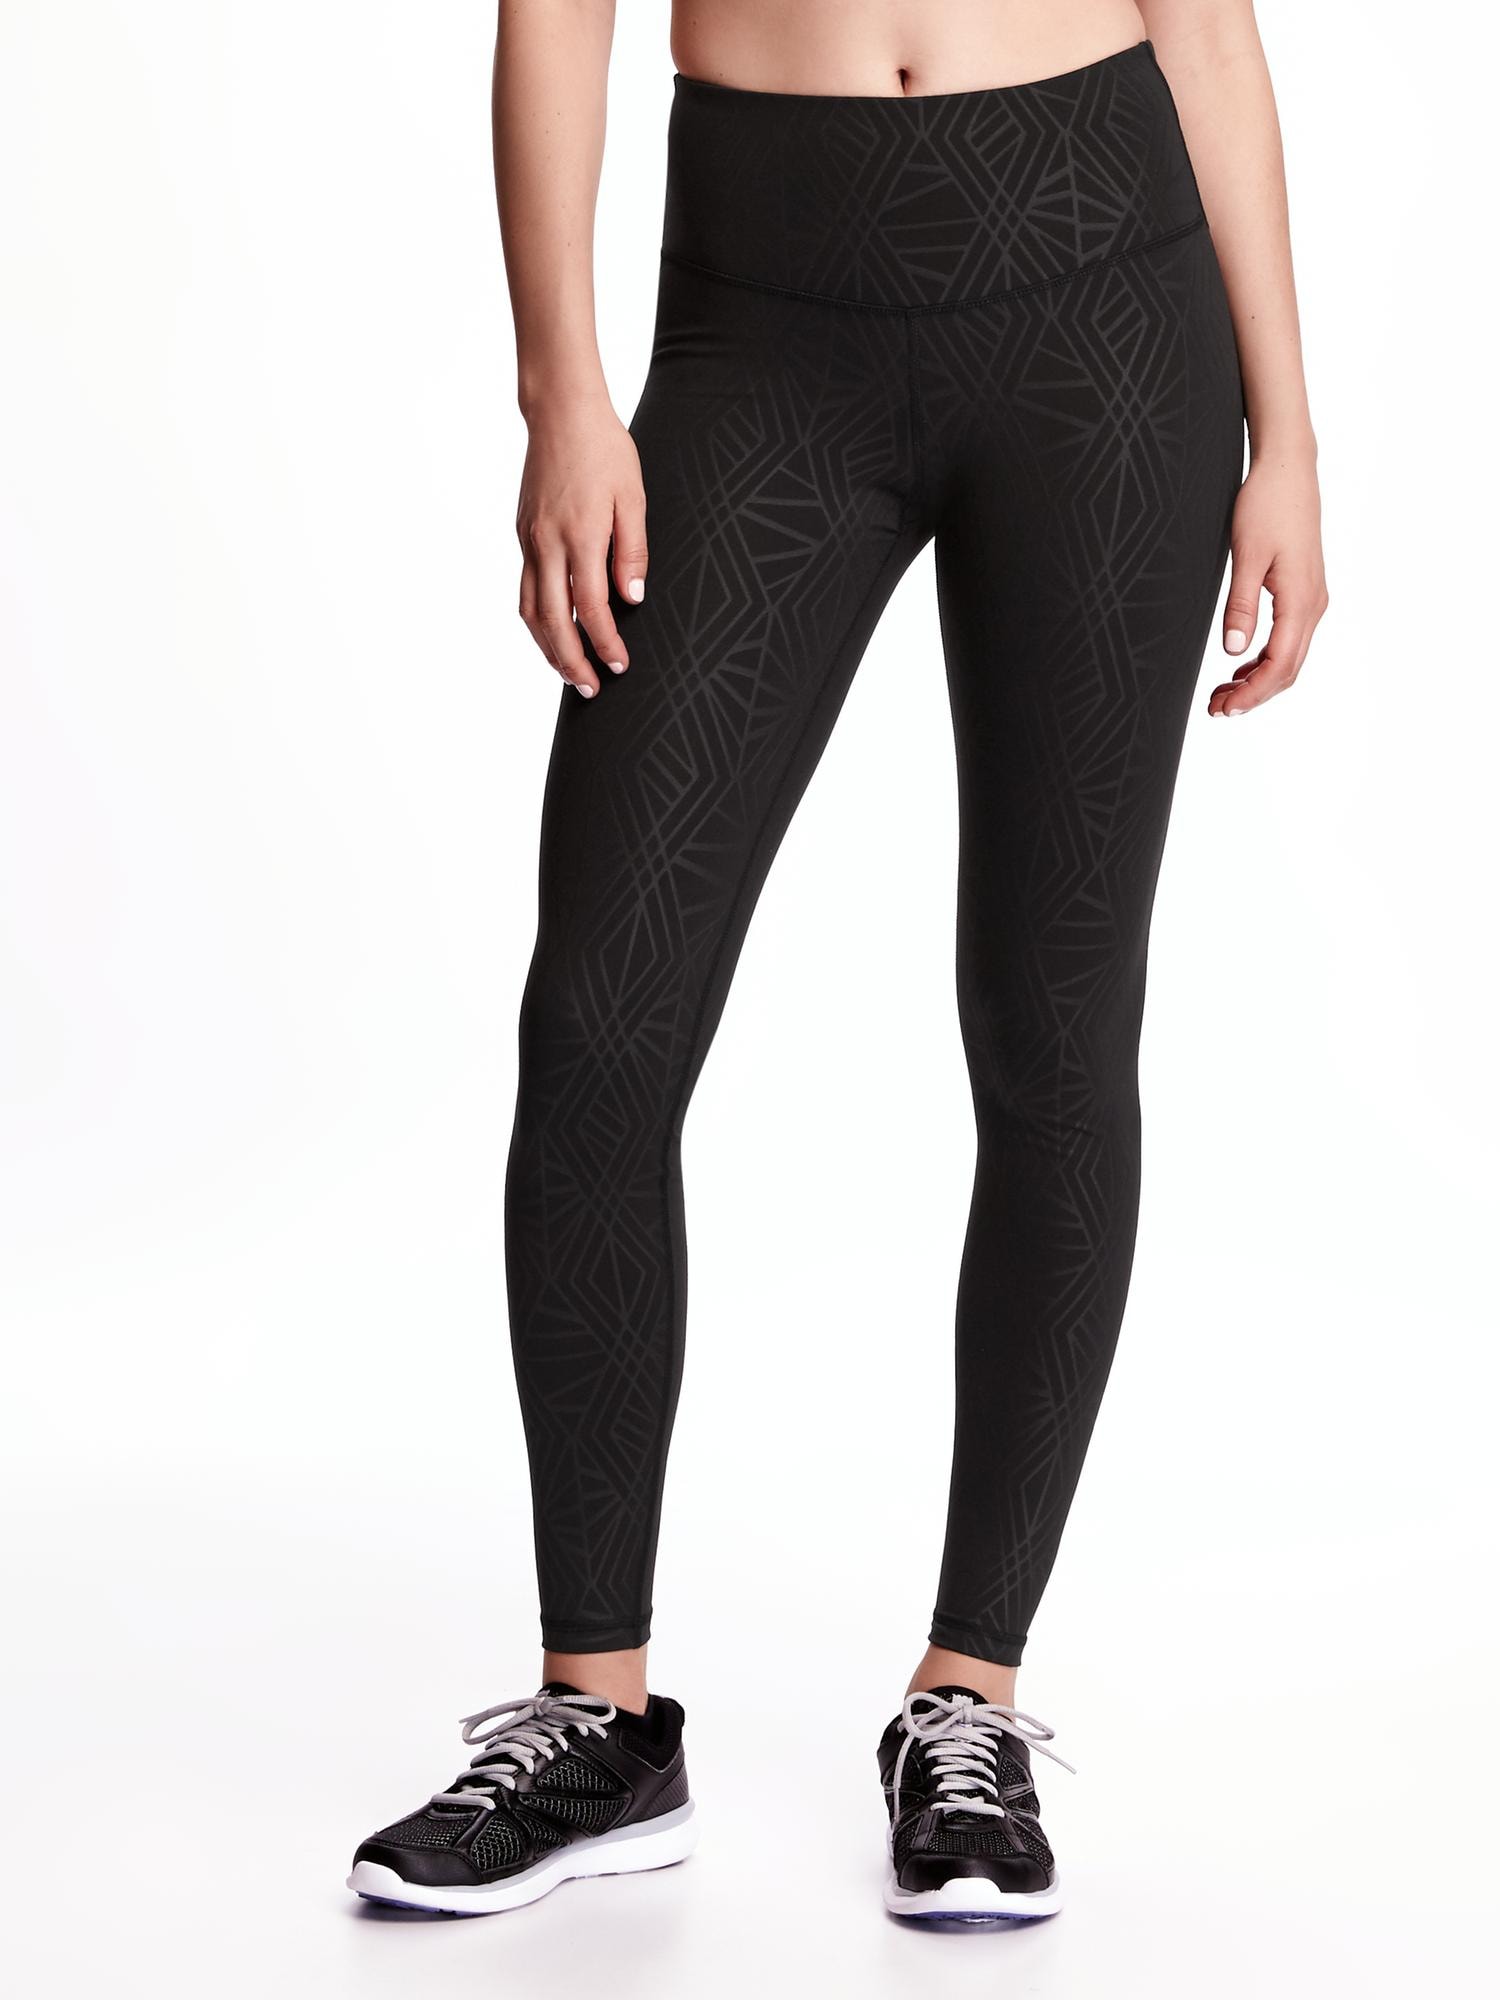 High-Rise Compression Leggings for Women, Old Navy